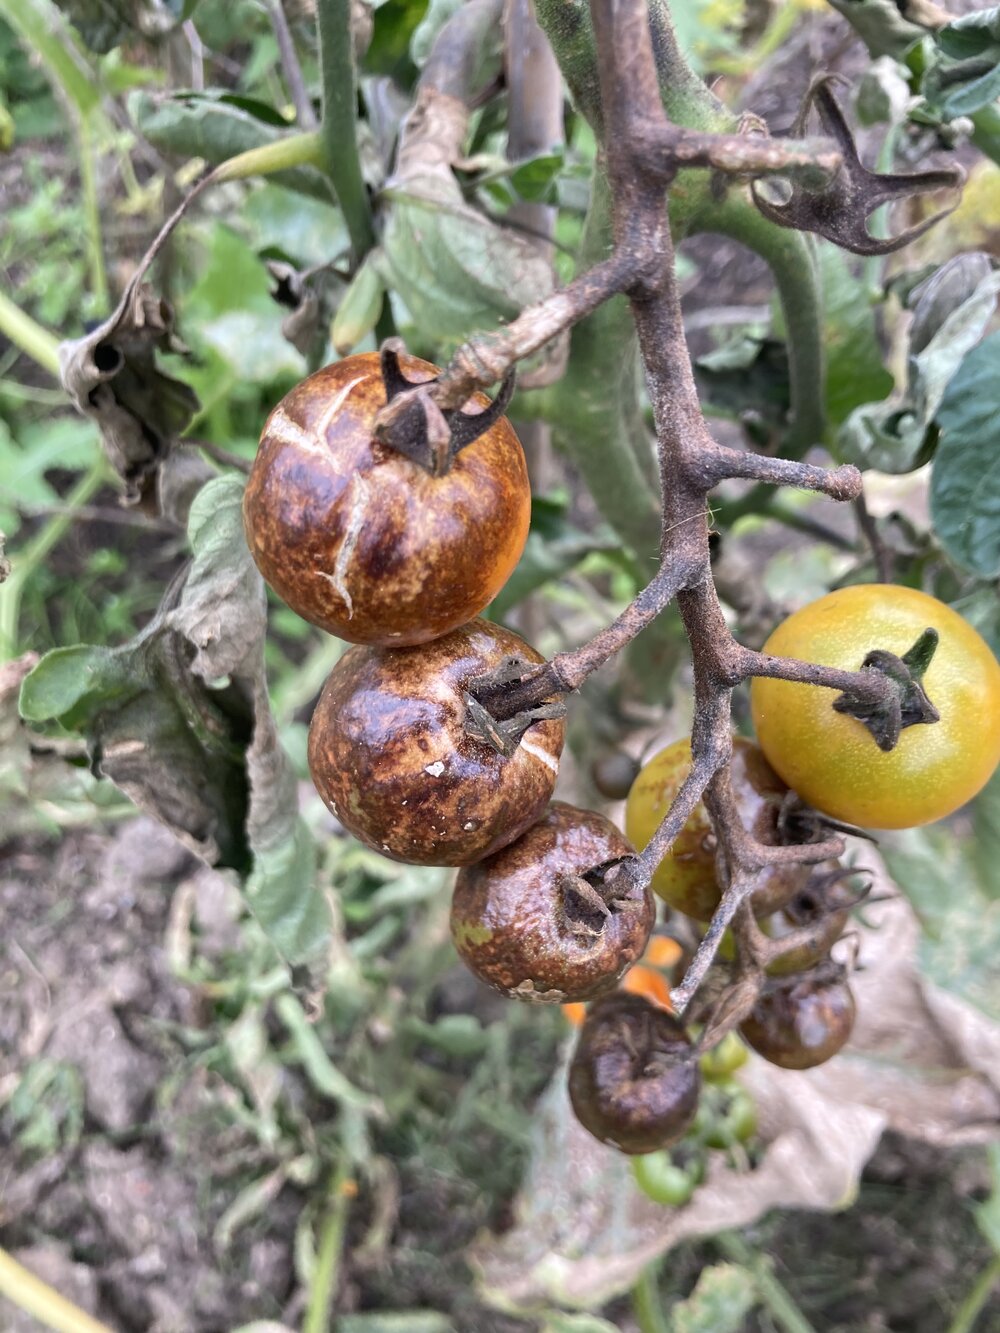 On the fruit